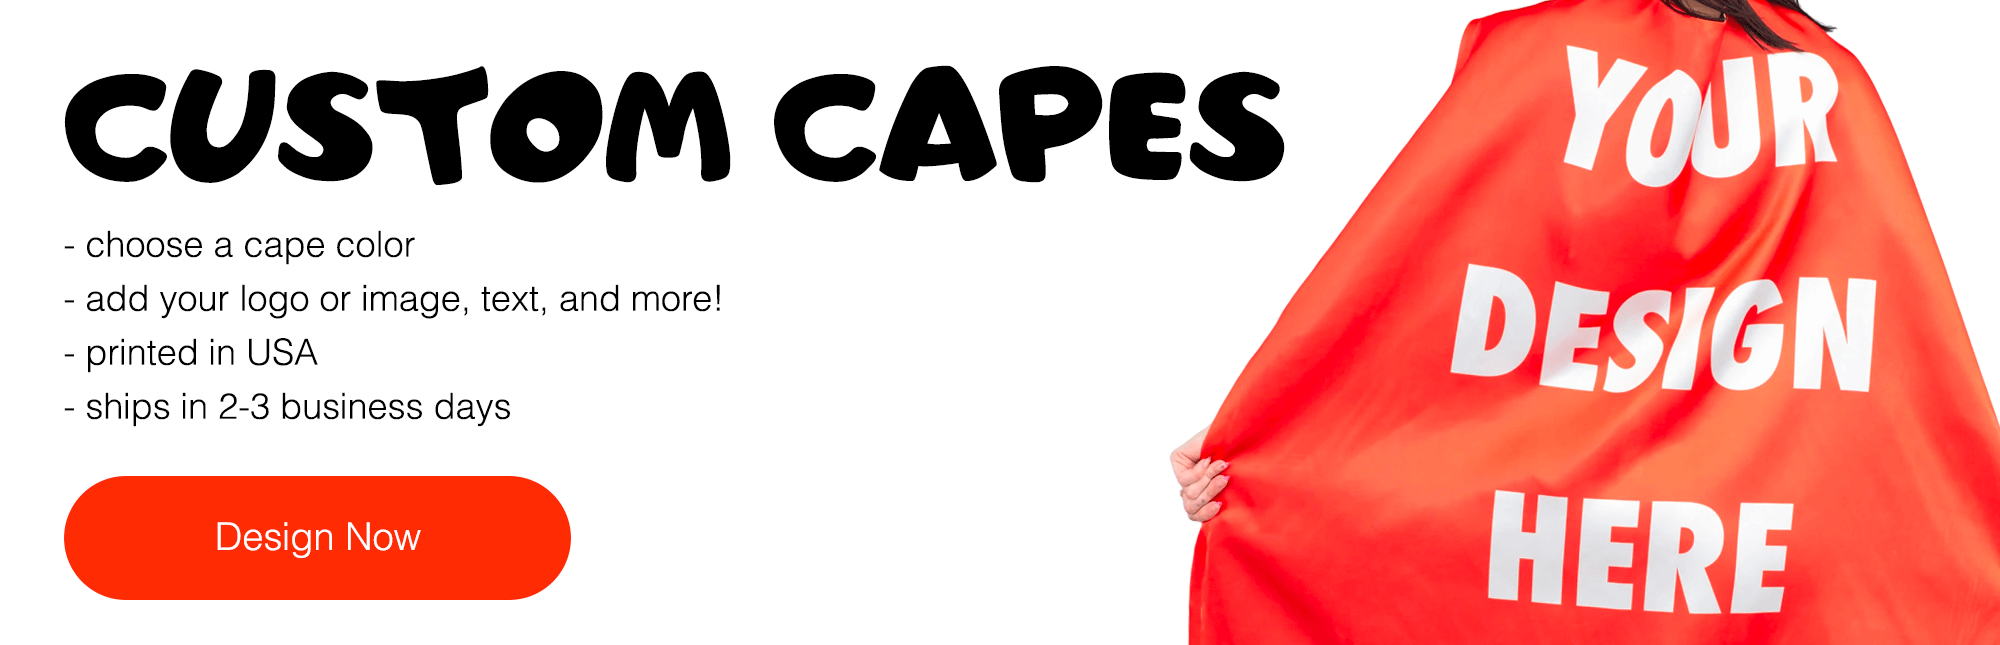 Wcapes